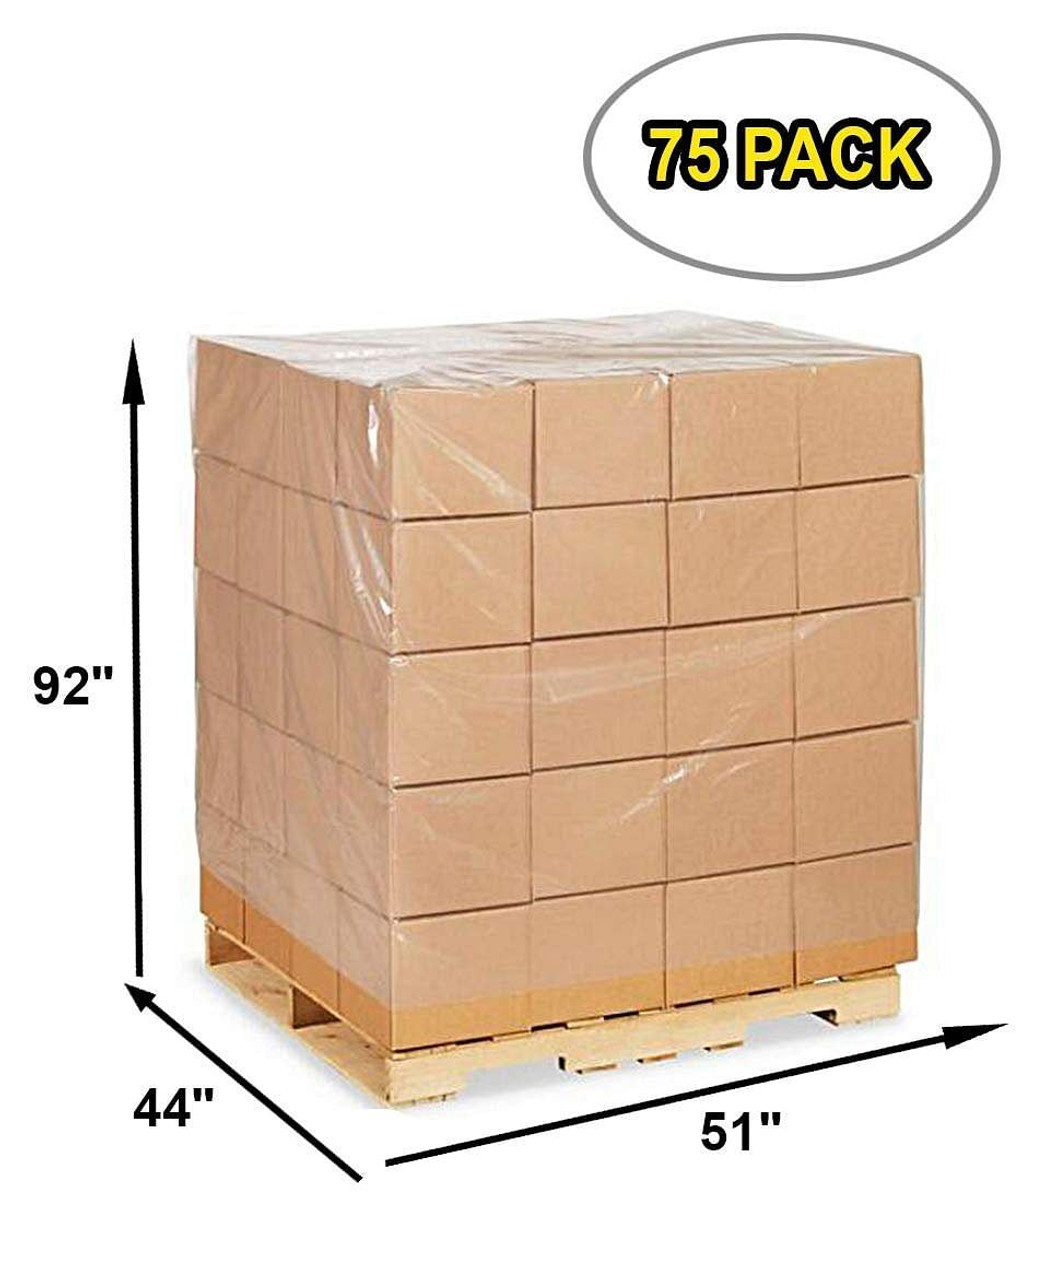 Pack of 125 Plastic Pallet Covers 50 x 49 x 75. Clear Reusable Low Density Polyethylene Pallet Bag 